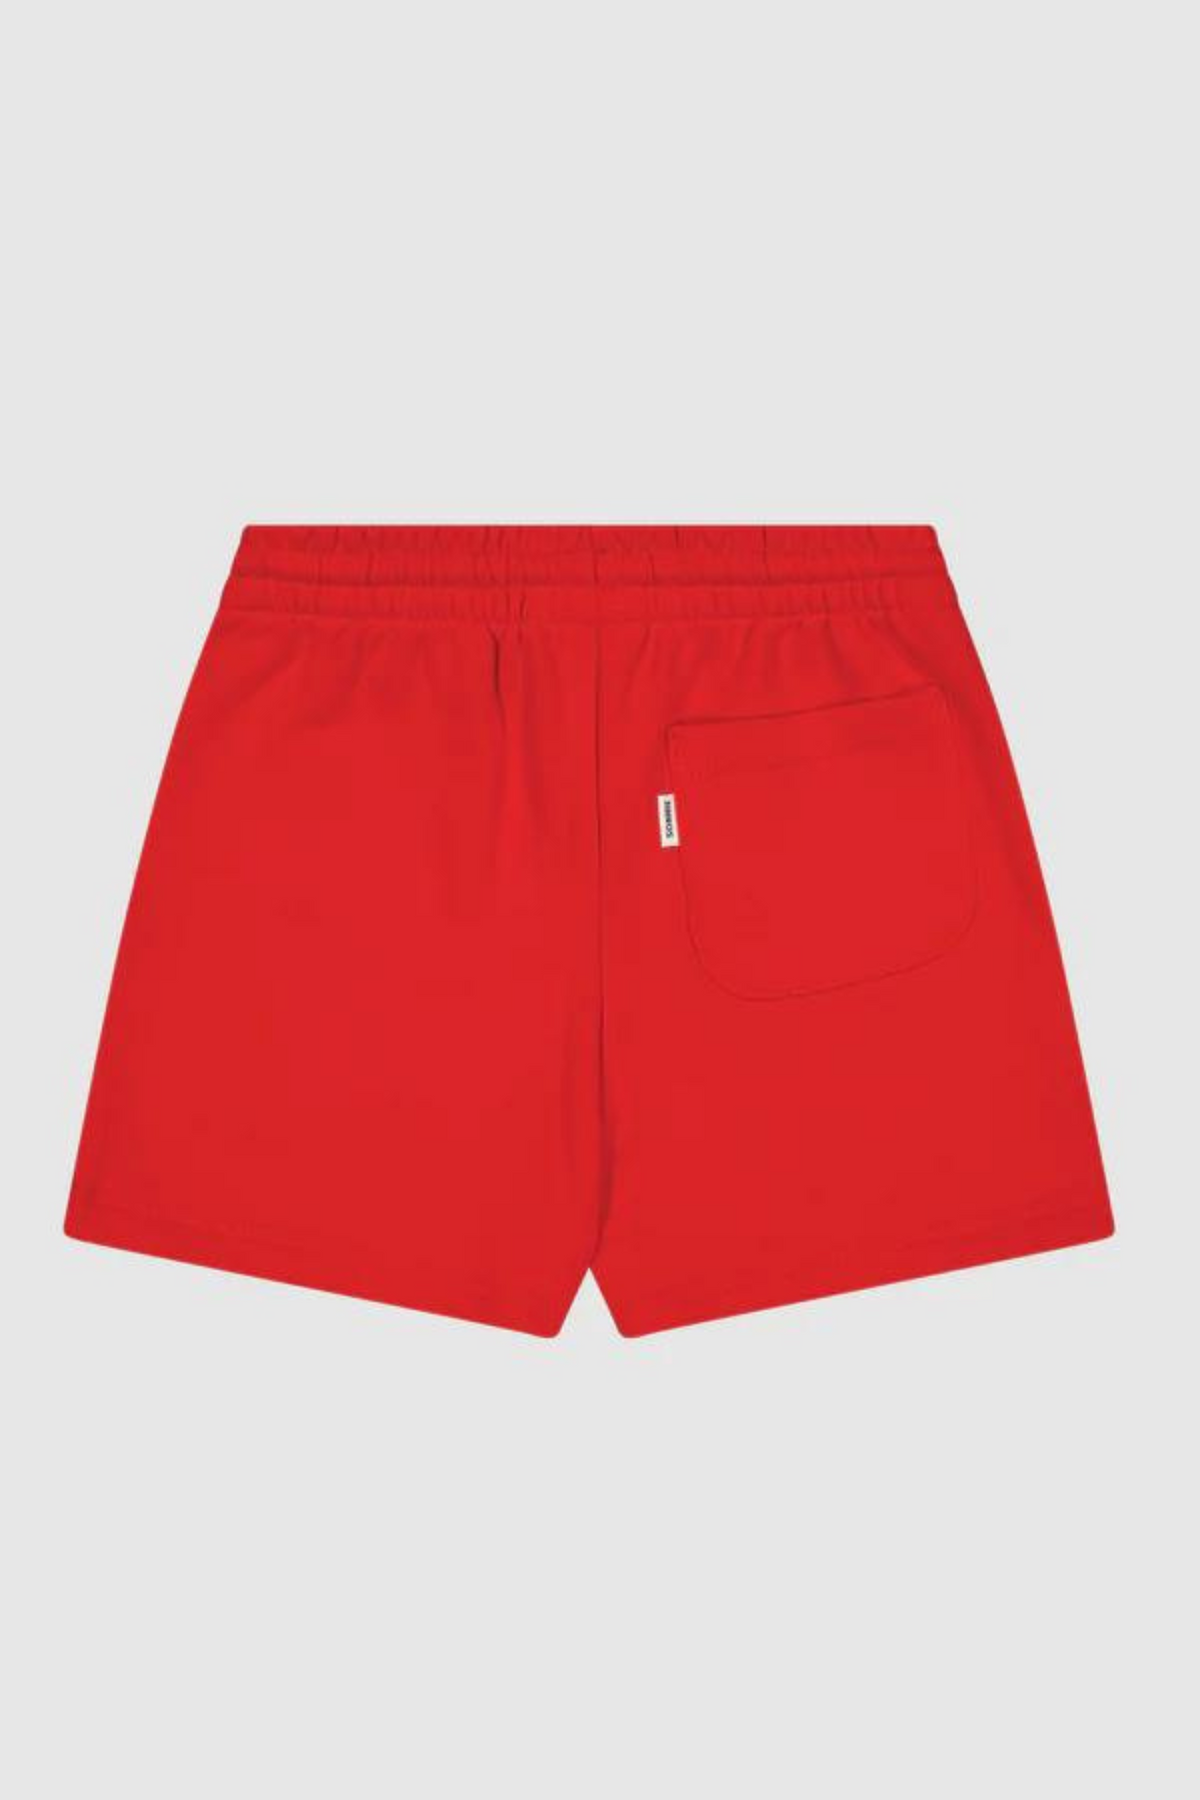 EARL SWEAT SHORTS - TEAM RED